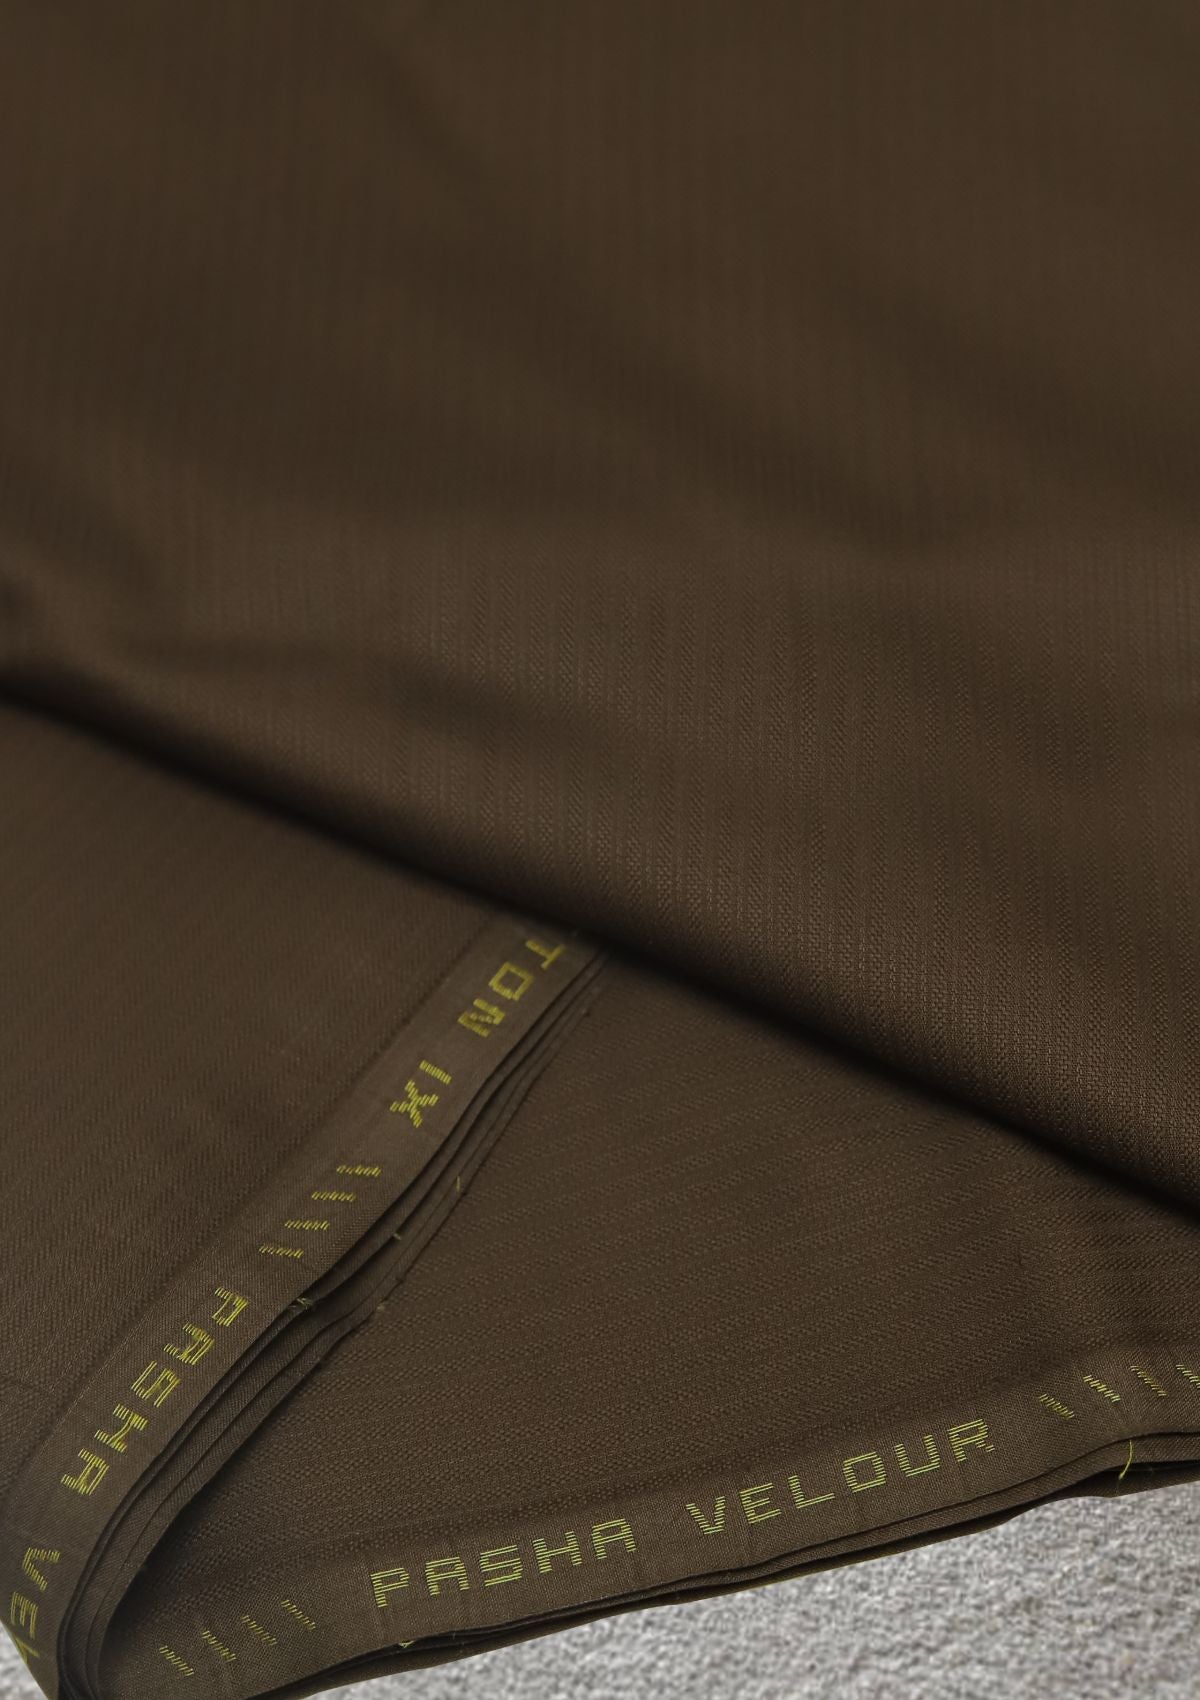 Pasha Velour Cotton Color# (006 D Brown) available at Saleem Fabrics Traditions